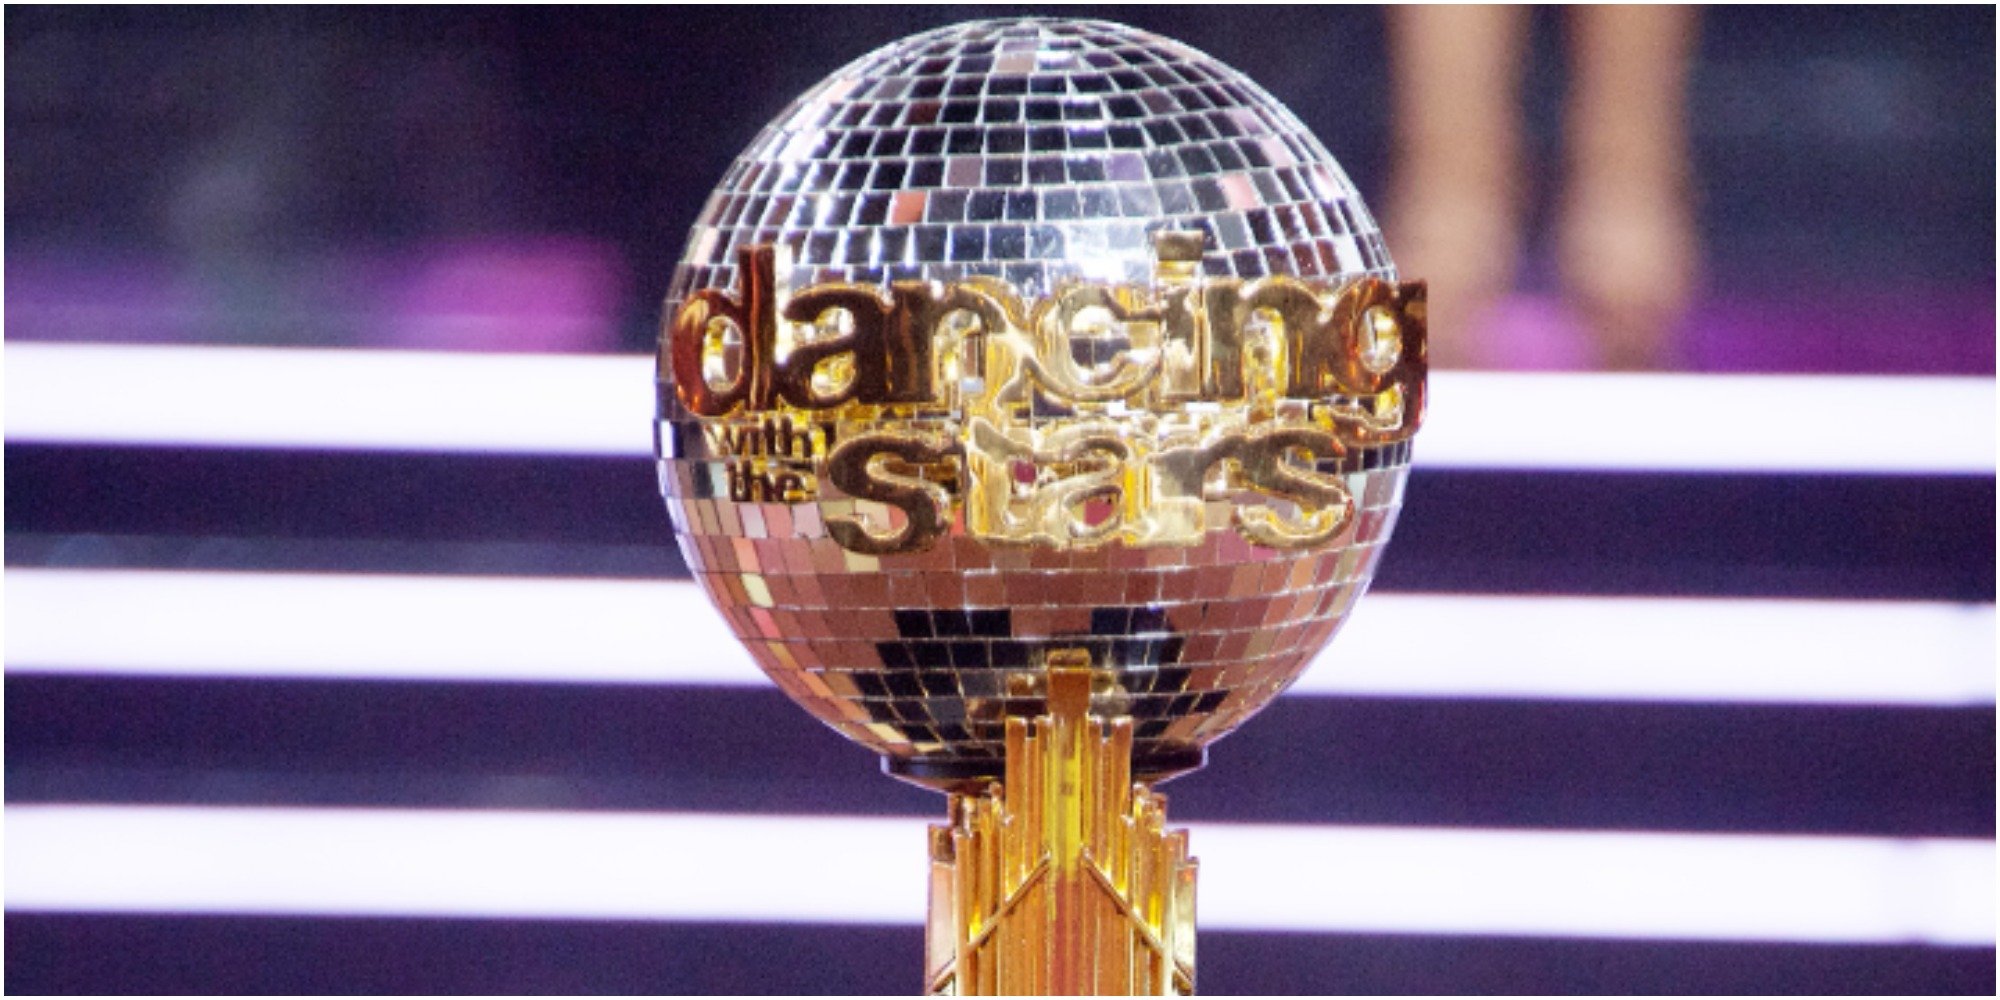 The official trophy of Dancing with the Stars.